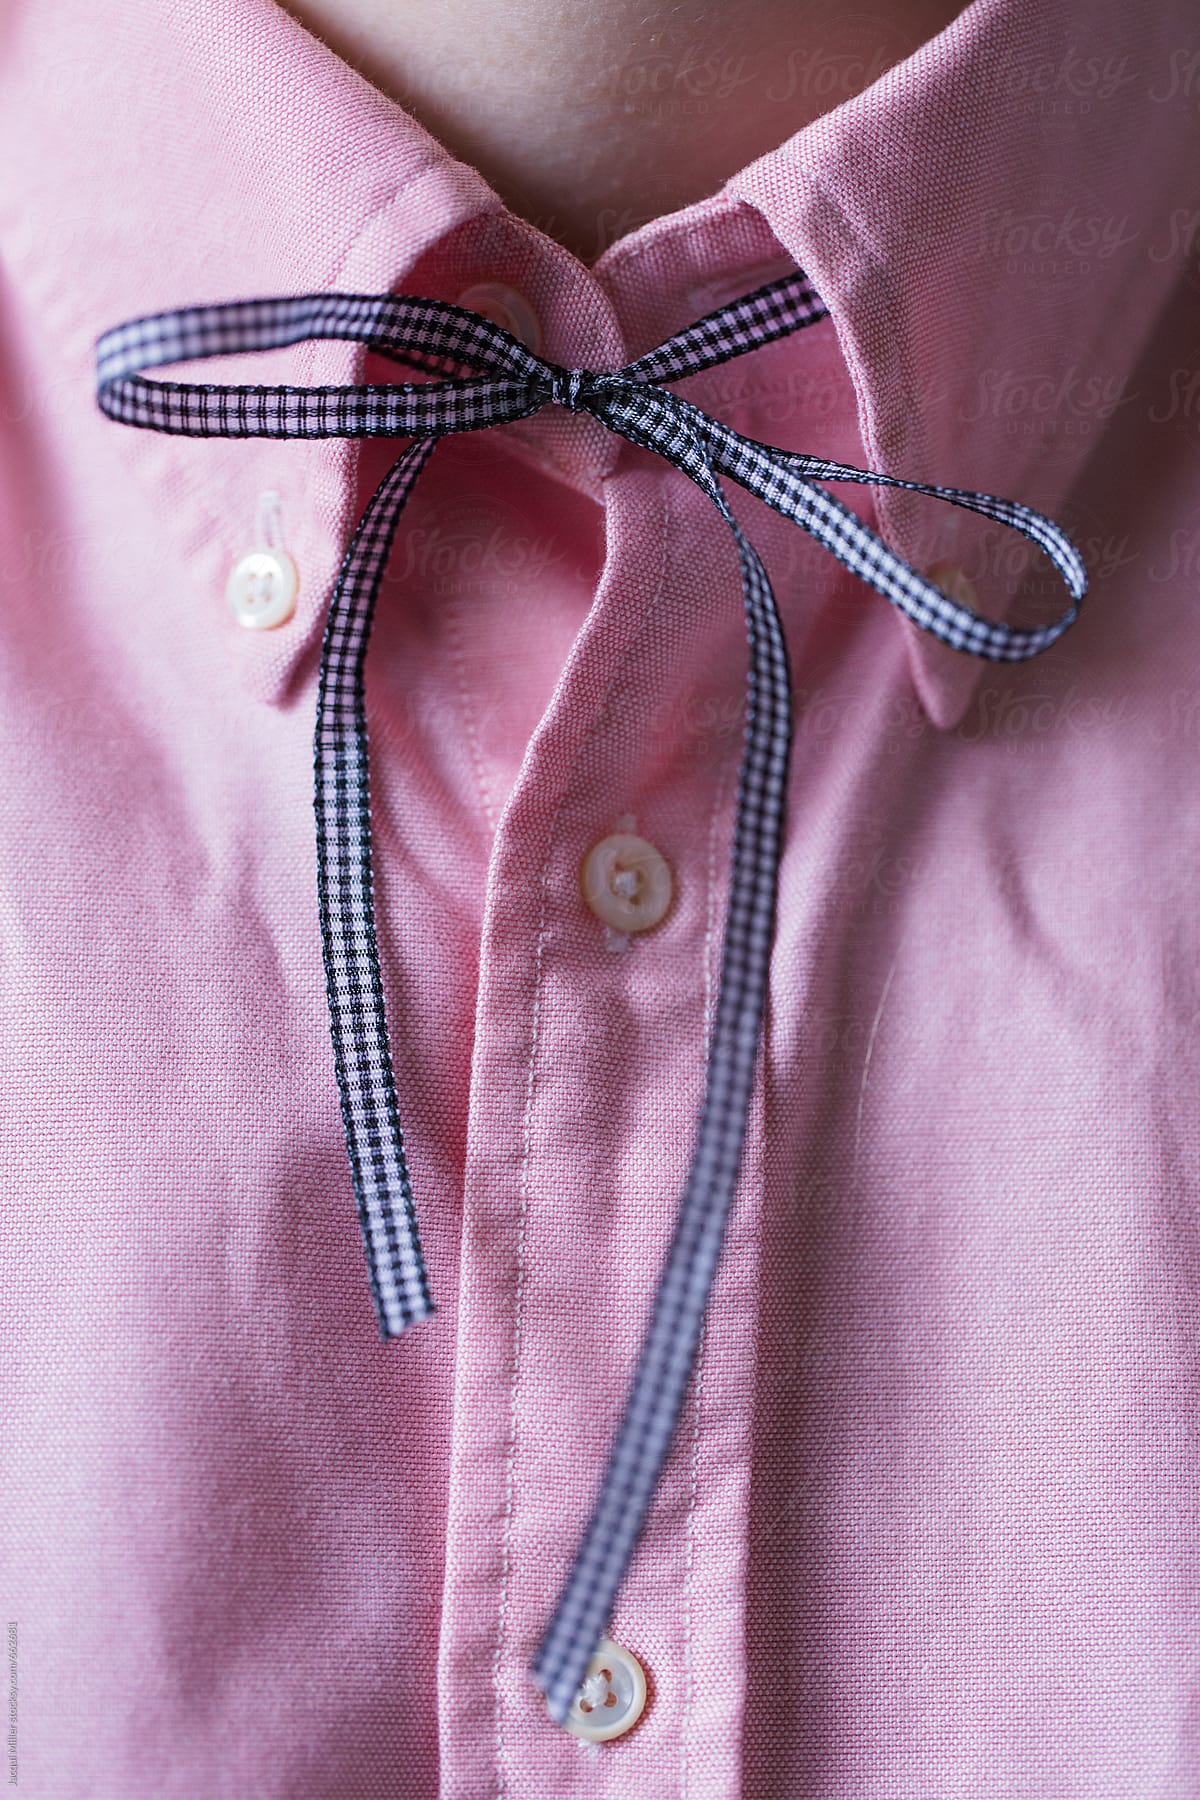 Close up of pink collared shirt with a blue ribbon tie